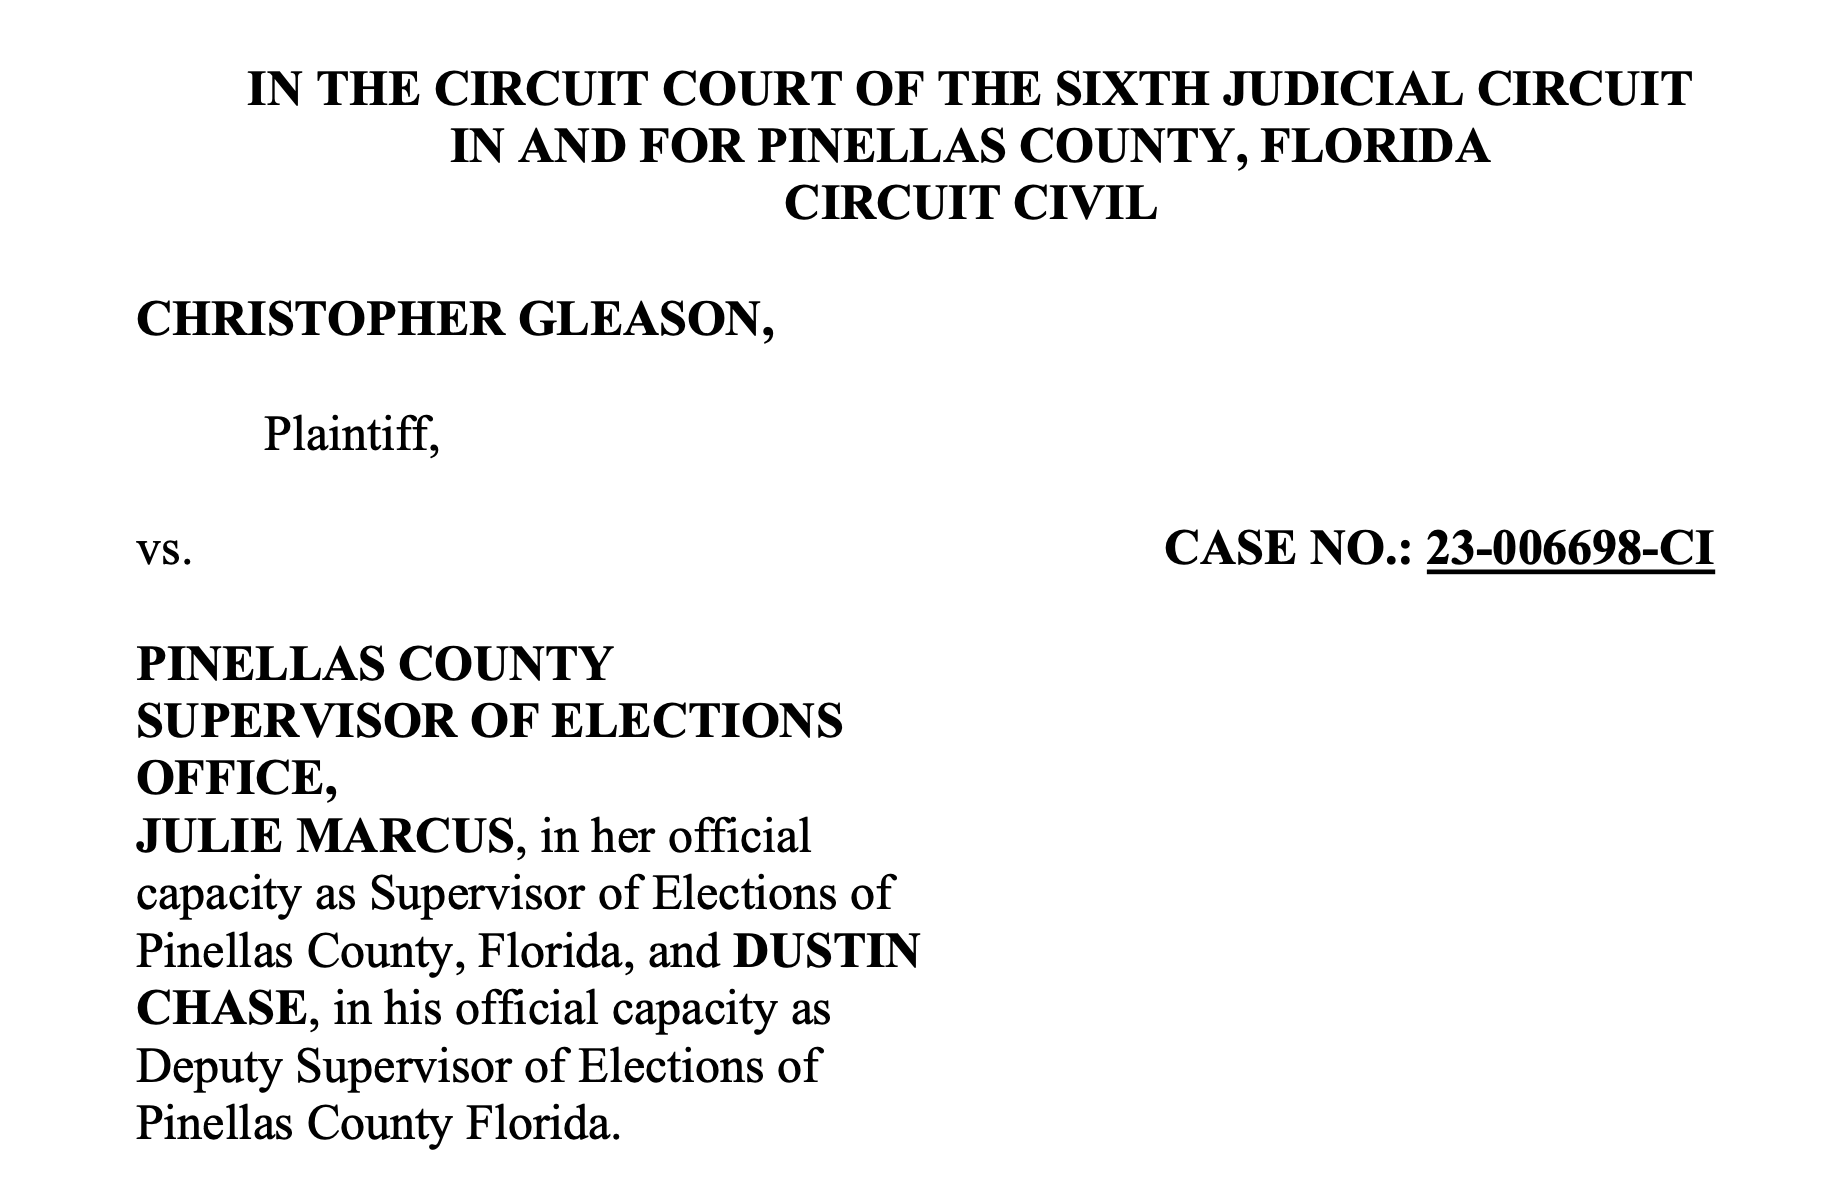 Gleason Files Motion To Produce Documents In Pinellas County Election Fraud Case